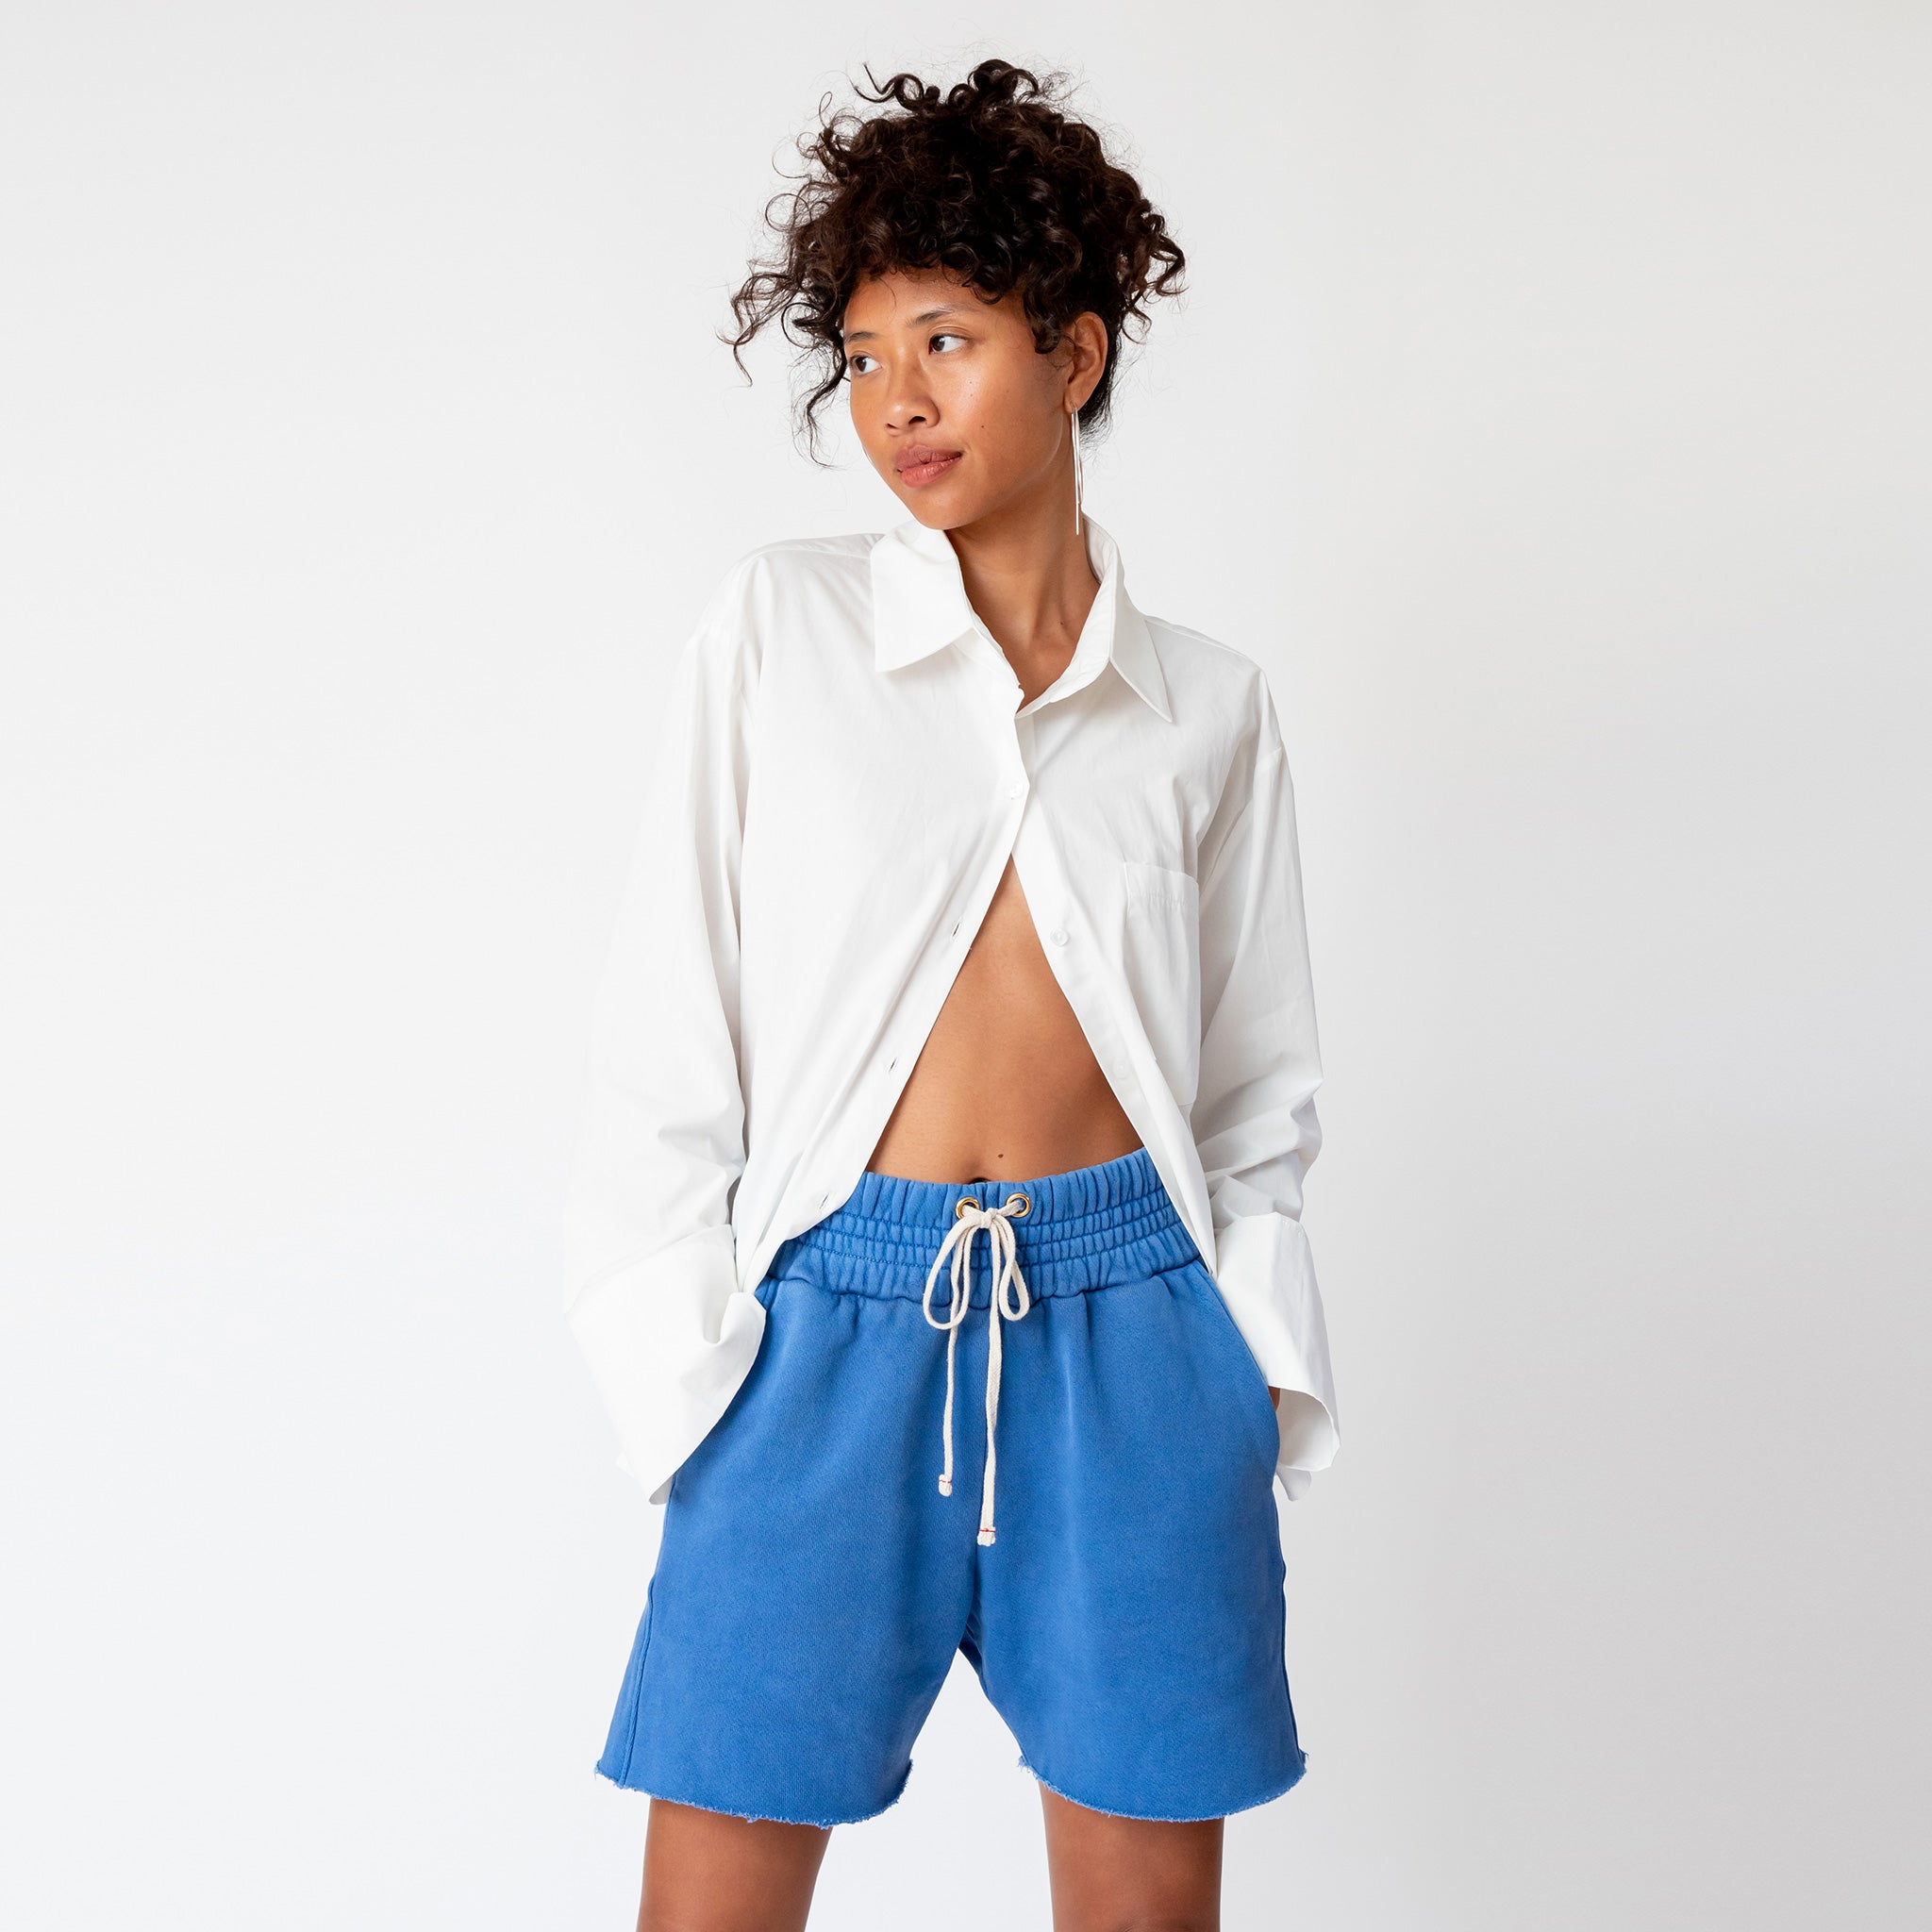 A model wears the Les Tien Yacht Short in electric blue, which feature a wide ruched elastic waistband, long white drawstrings, and an unfinished hem - paired here with a white button down shirt.